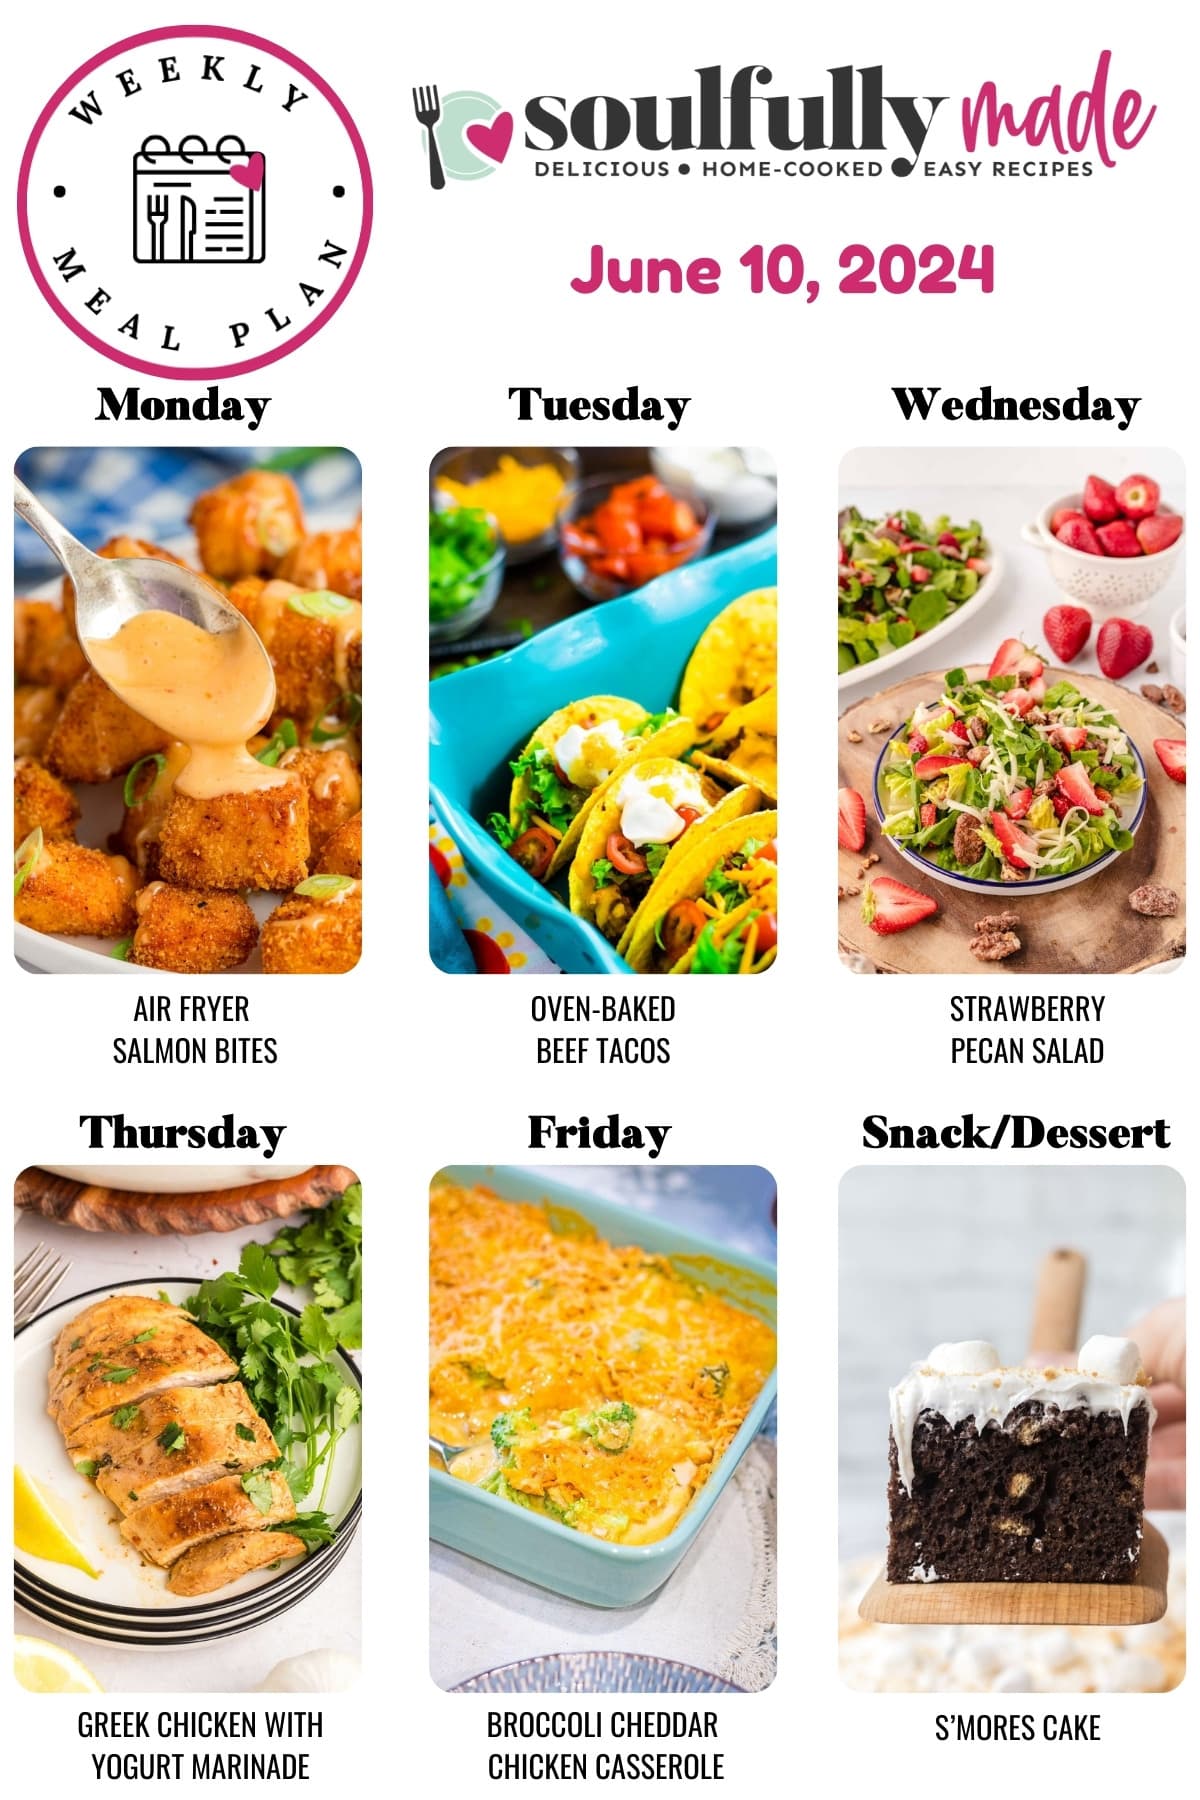 Weekly meal plan for June 10, 2024 including air fryer salmon bites, oven-baked beef tacos, strawberry pecan salad, greek chicken, broccoli chicken casserole and s'mores cake.